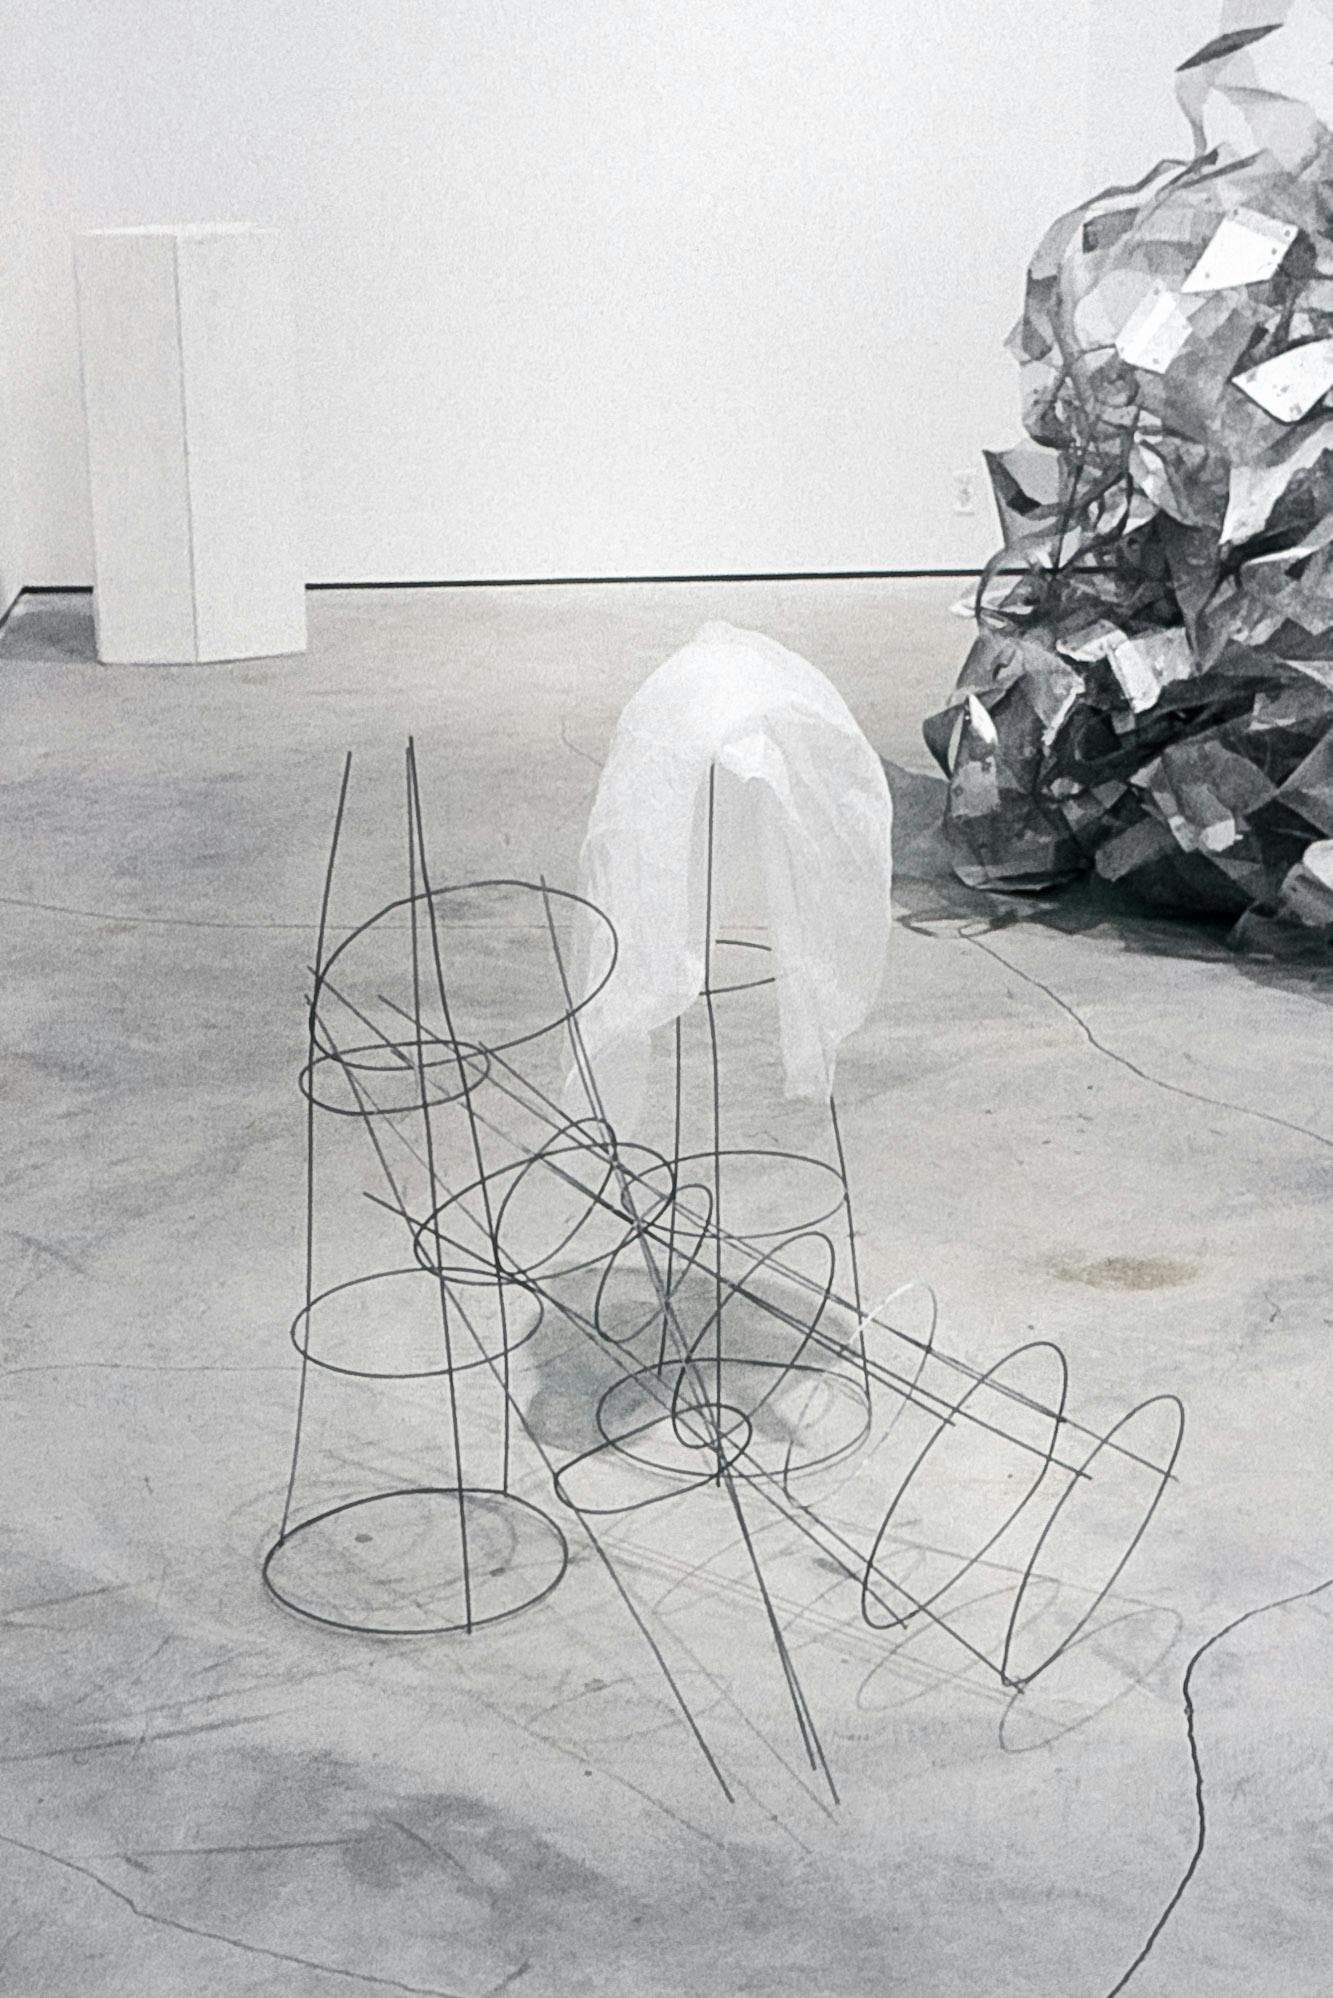 3 artworks visible in the corner of a gallery. The nearest work shows sculptures made of lines and circles of rebar wire, arranged and leaning on one another, with a piece of white fabric.